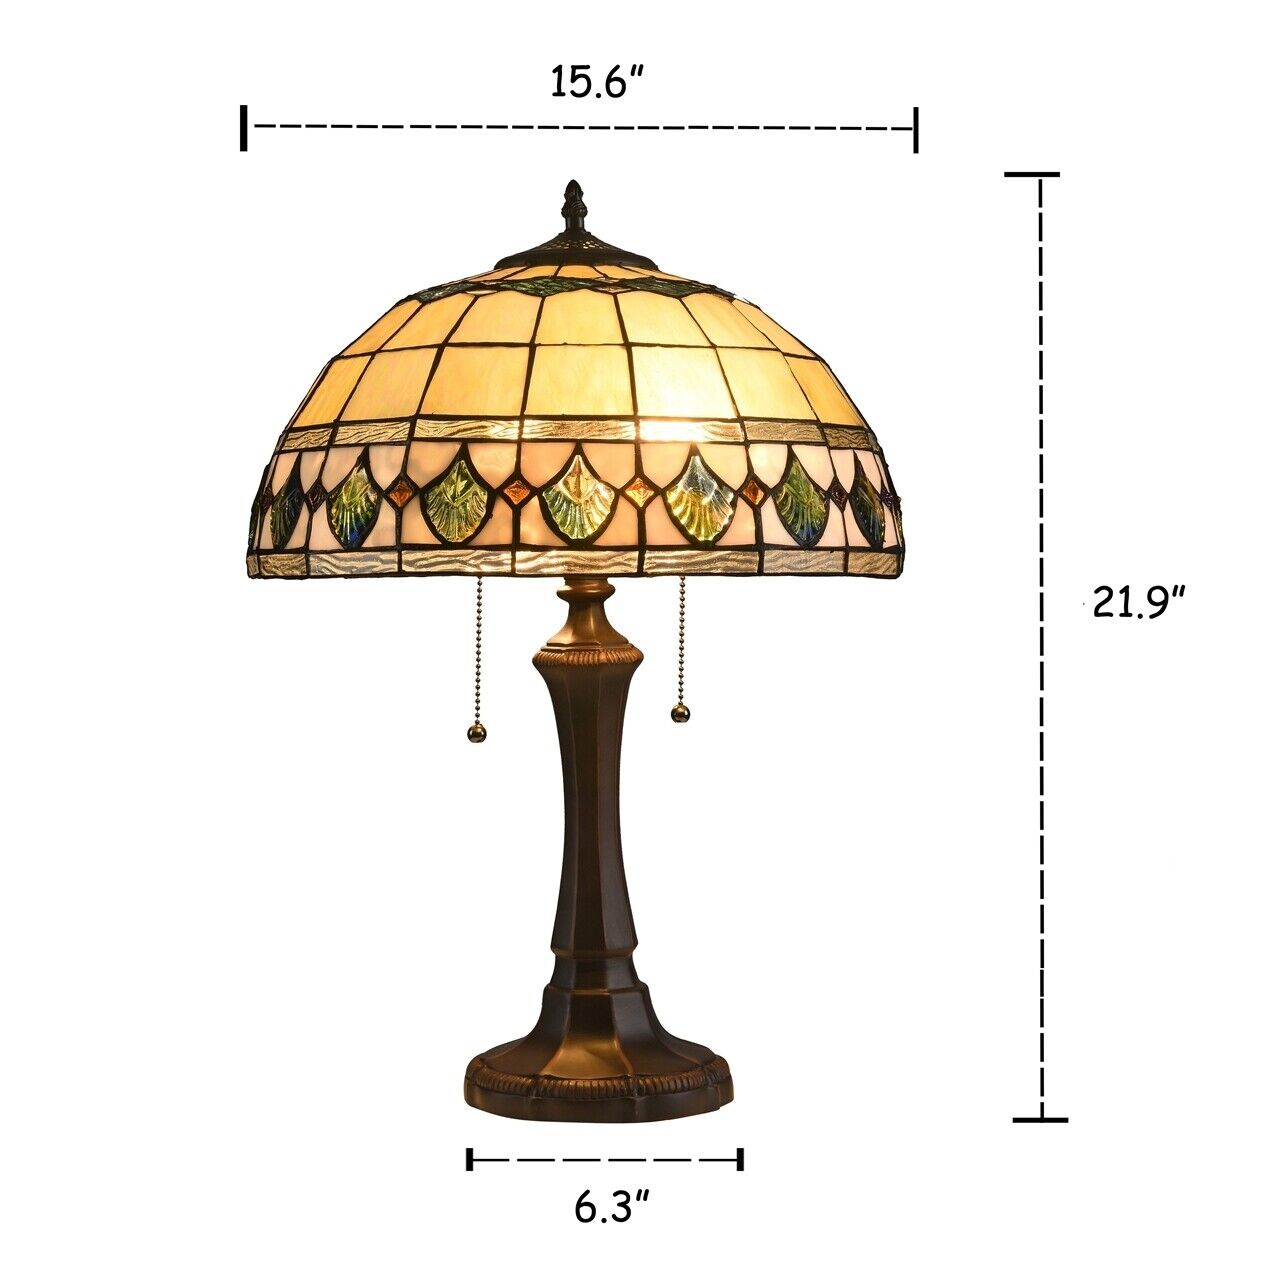 21.9" Antique Vintage Style Stained Glass Table Lamp